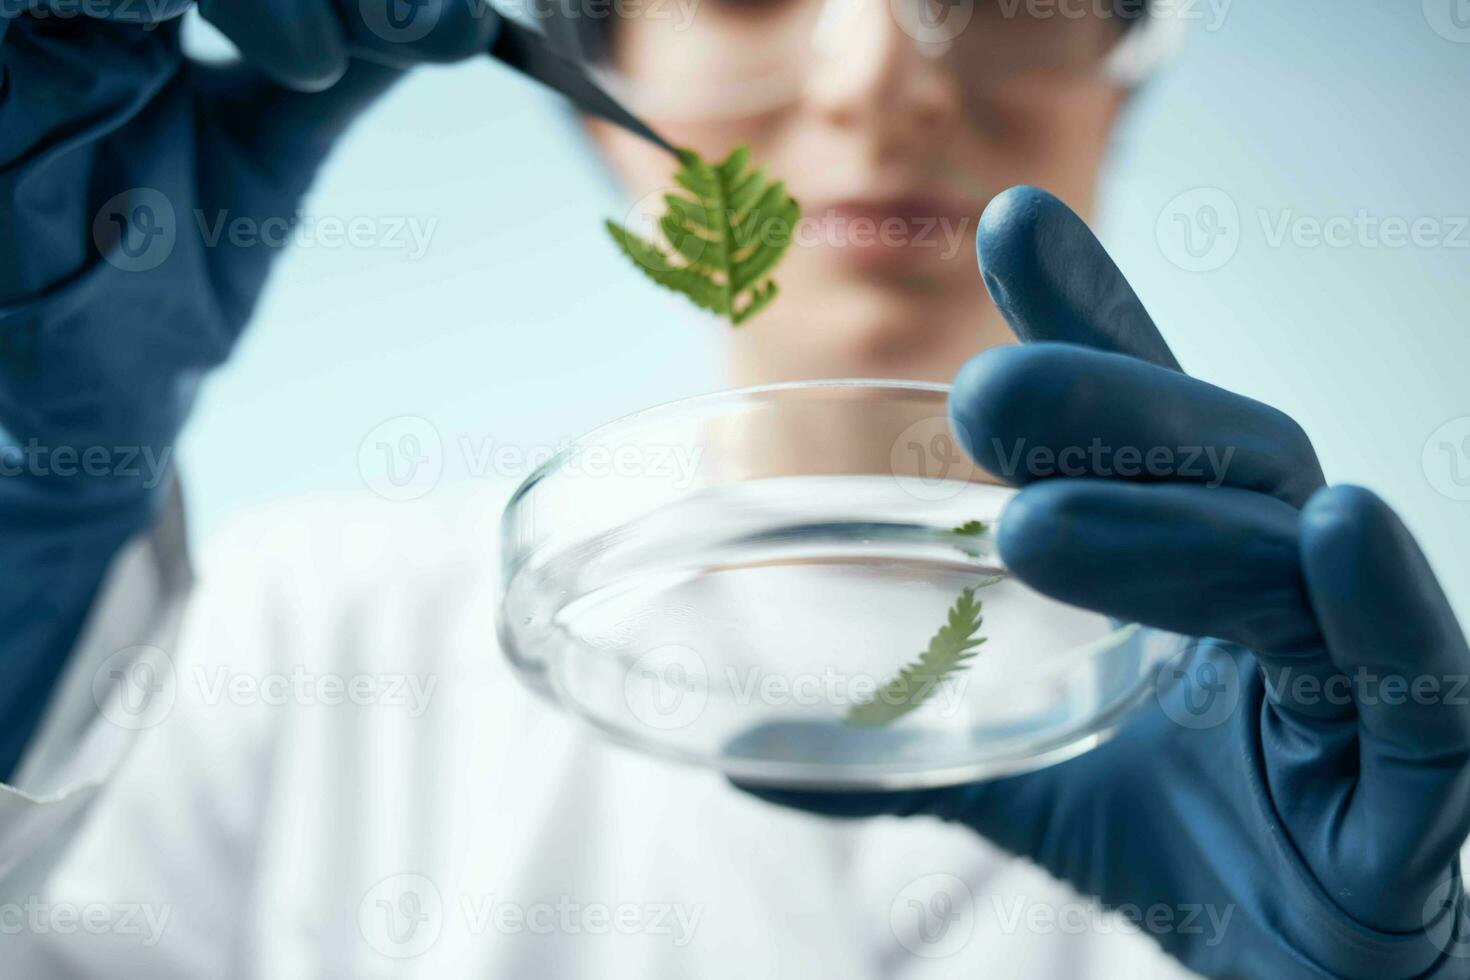 female laboratory assistant in white coat microbiology science work photo